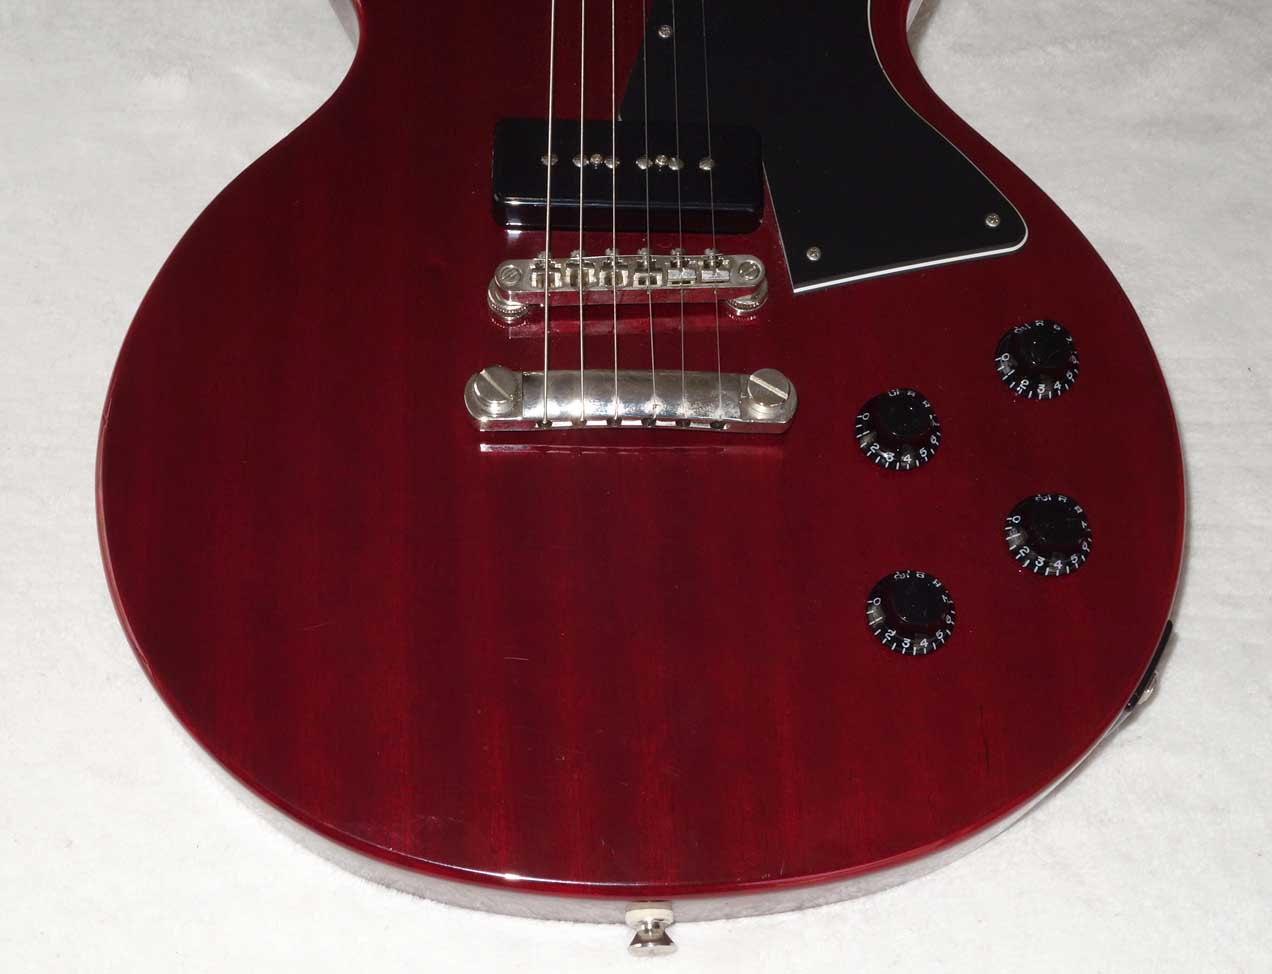 2010 Epiphone Les Paul Special SC in Heritage Cherry, Limited Edition, w/Epi P90 Pickups